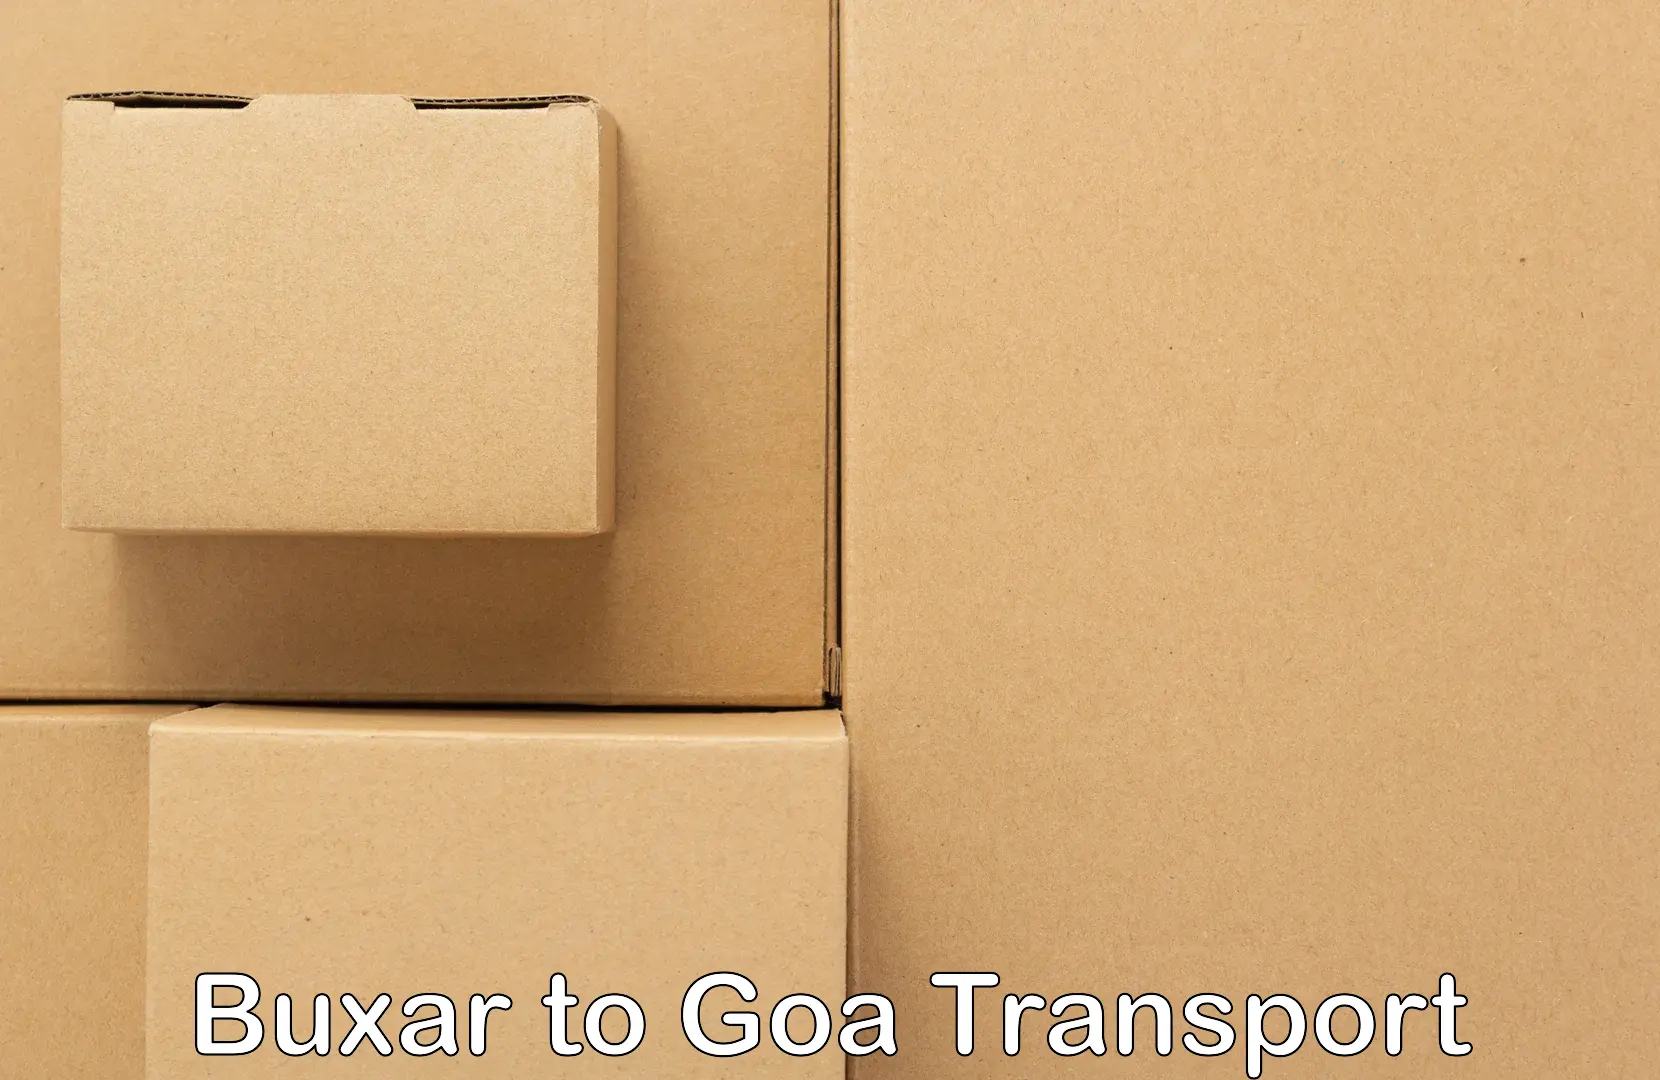 Daily transport service Buxar to South Goa